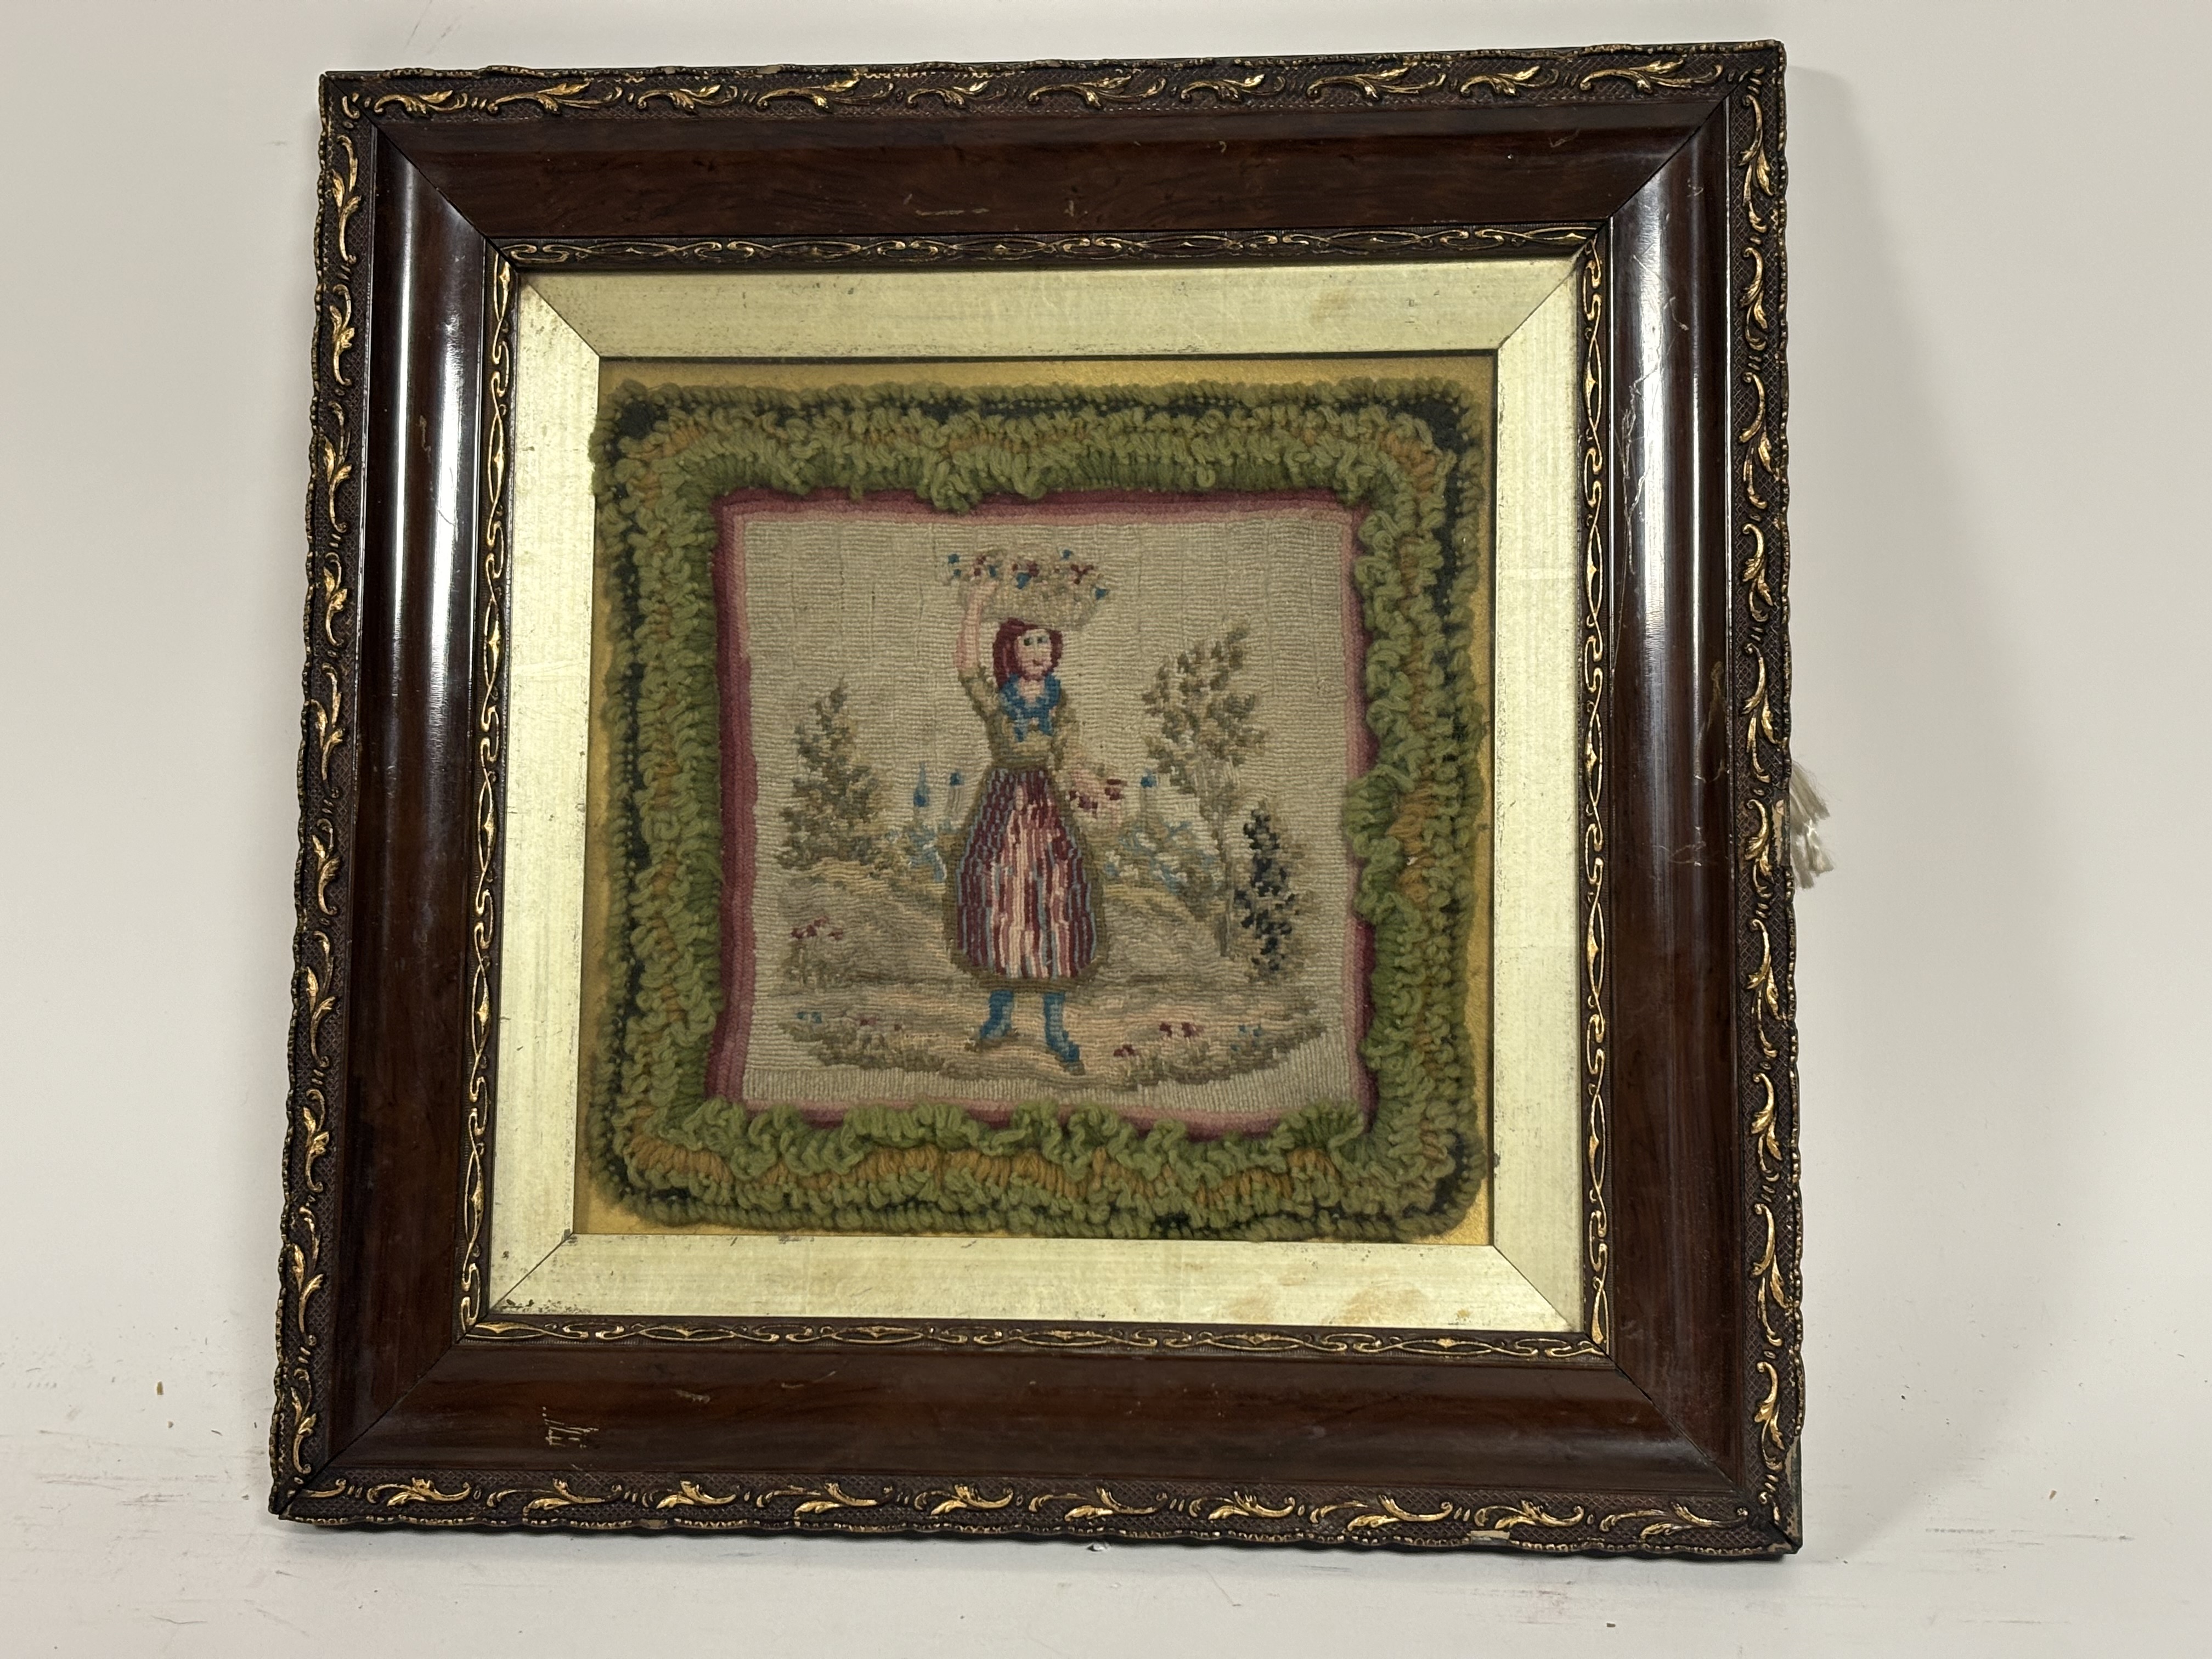 A framed embroidered textile by Catherine Caine of a woman holding a basket on her head in a field